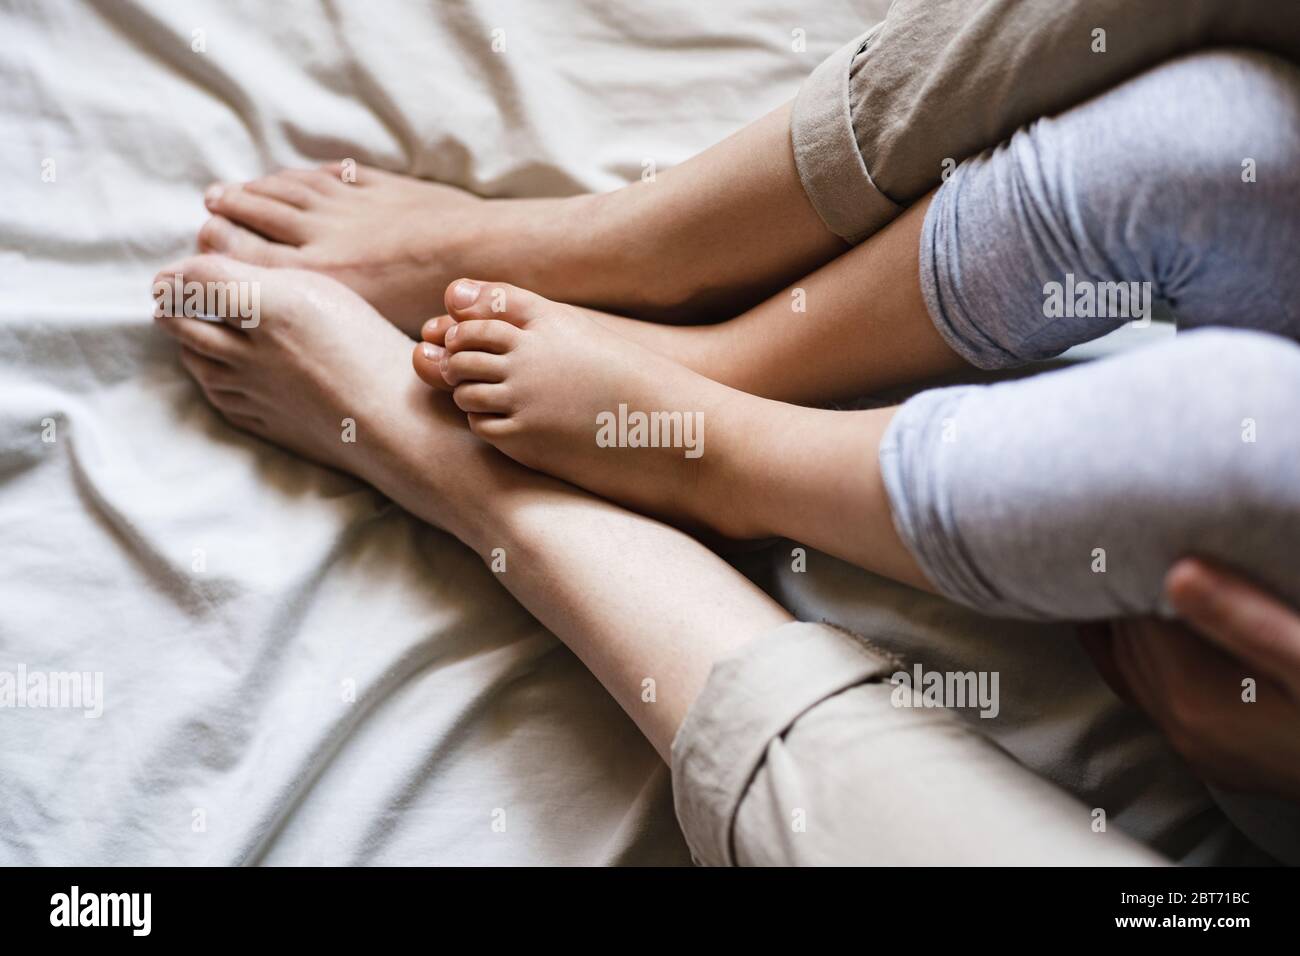 Close up of a mother and child's feet rubbing together while sitting on some beige bed sheets. It's a tender intimate moment Stock Photo